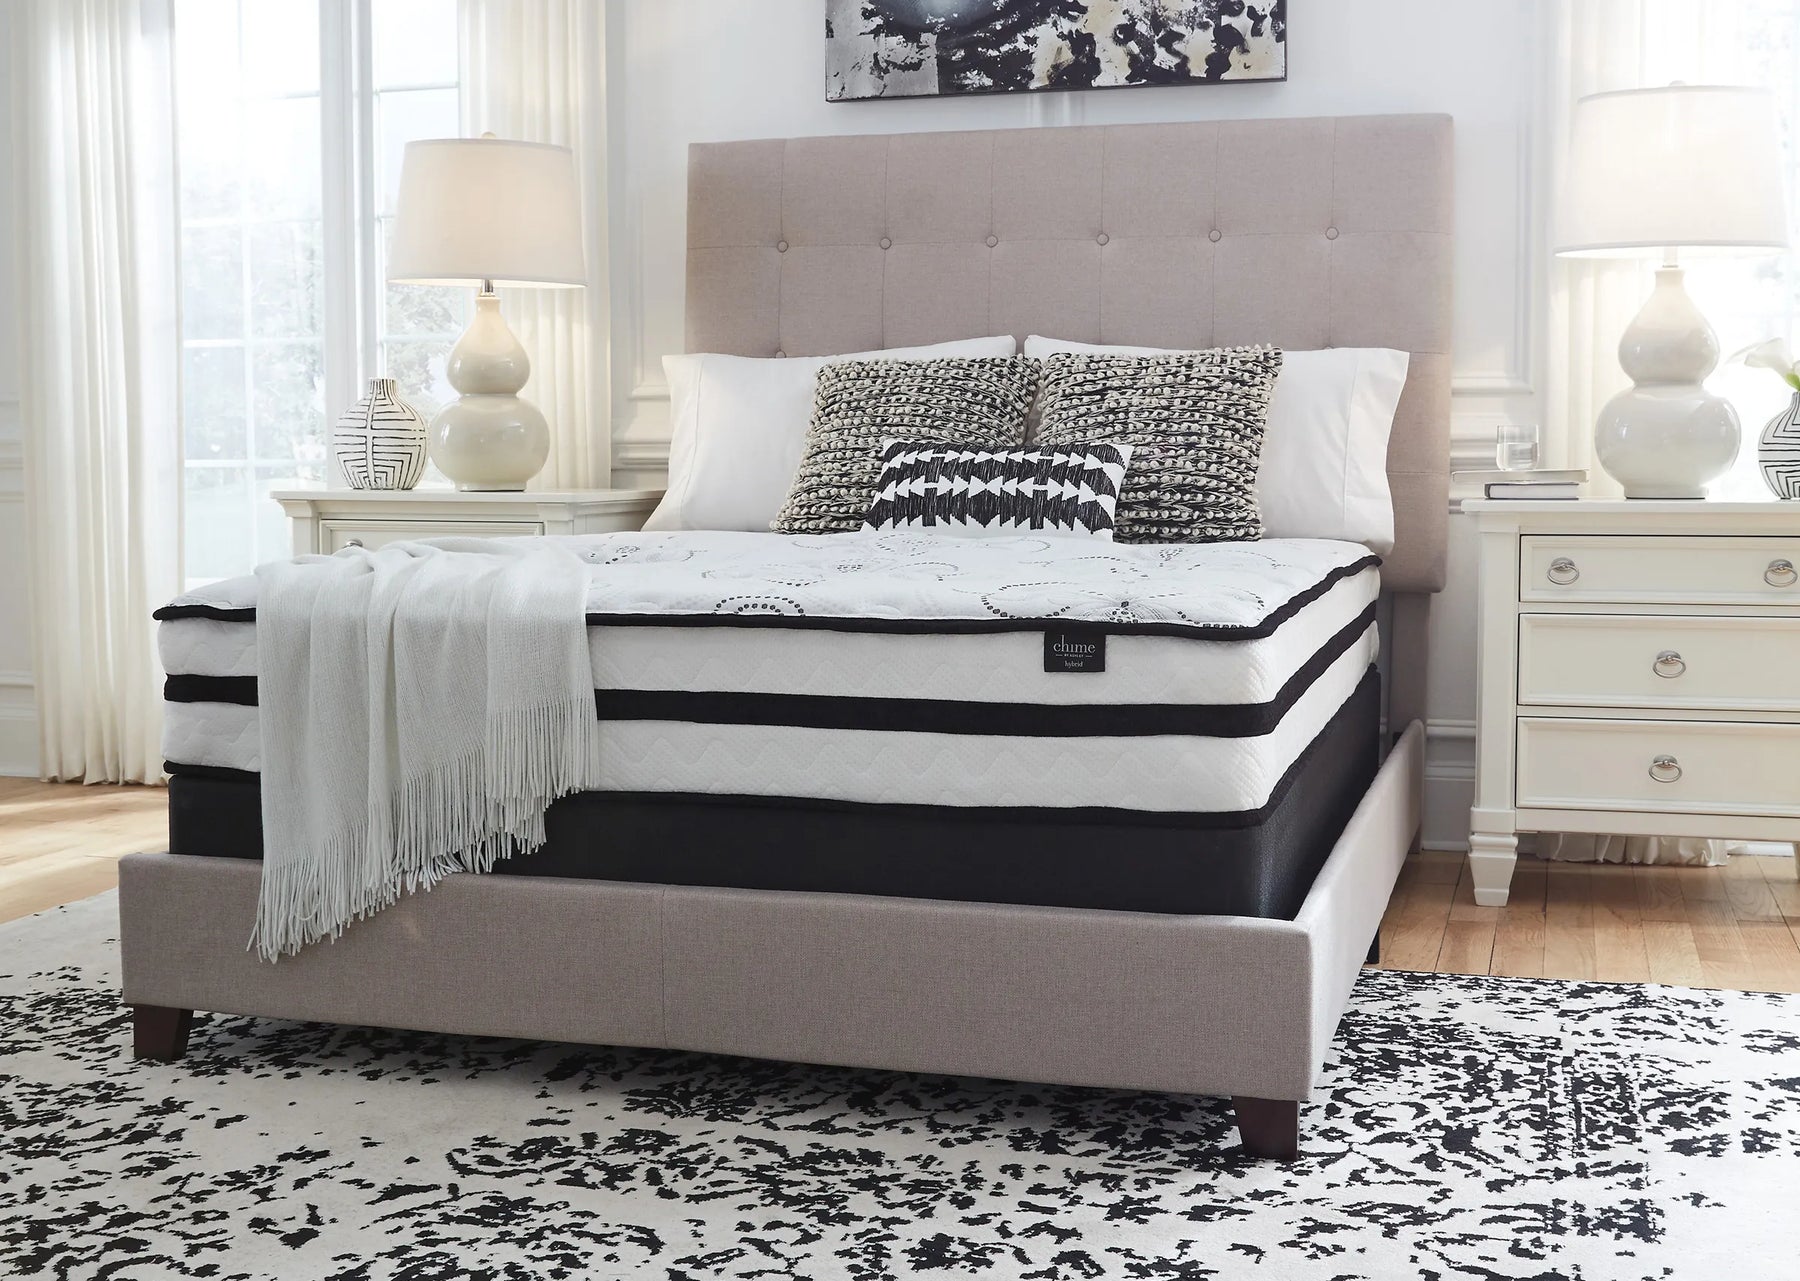 Mattress and Beds - Las Vegas Mattress Stores, We carry queen king twin full and adjustble beds, Memory foam, Orthopedic, spring, Firm Mattress and Best Mattress Store near me in Las Vegas, NV 